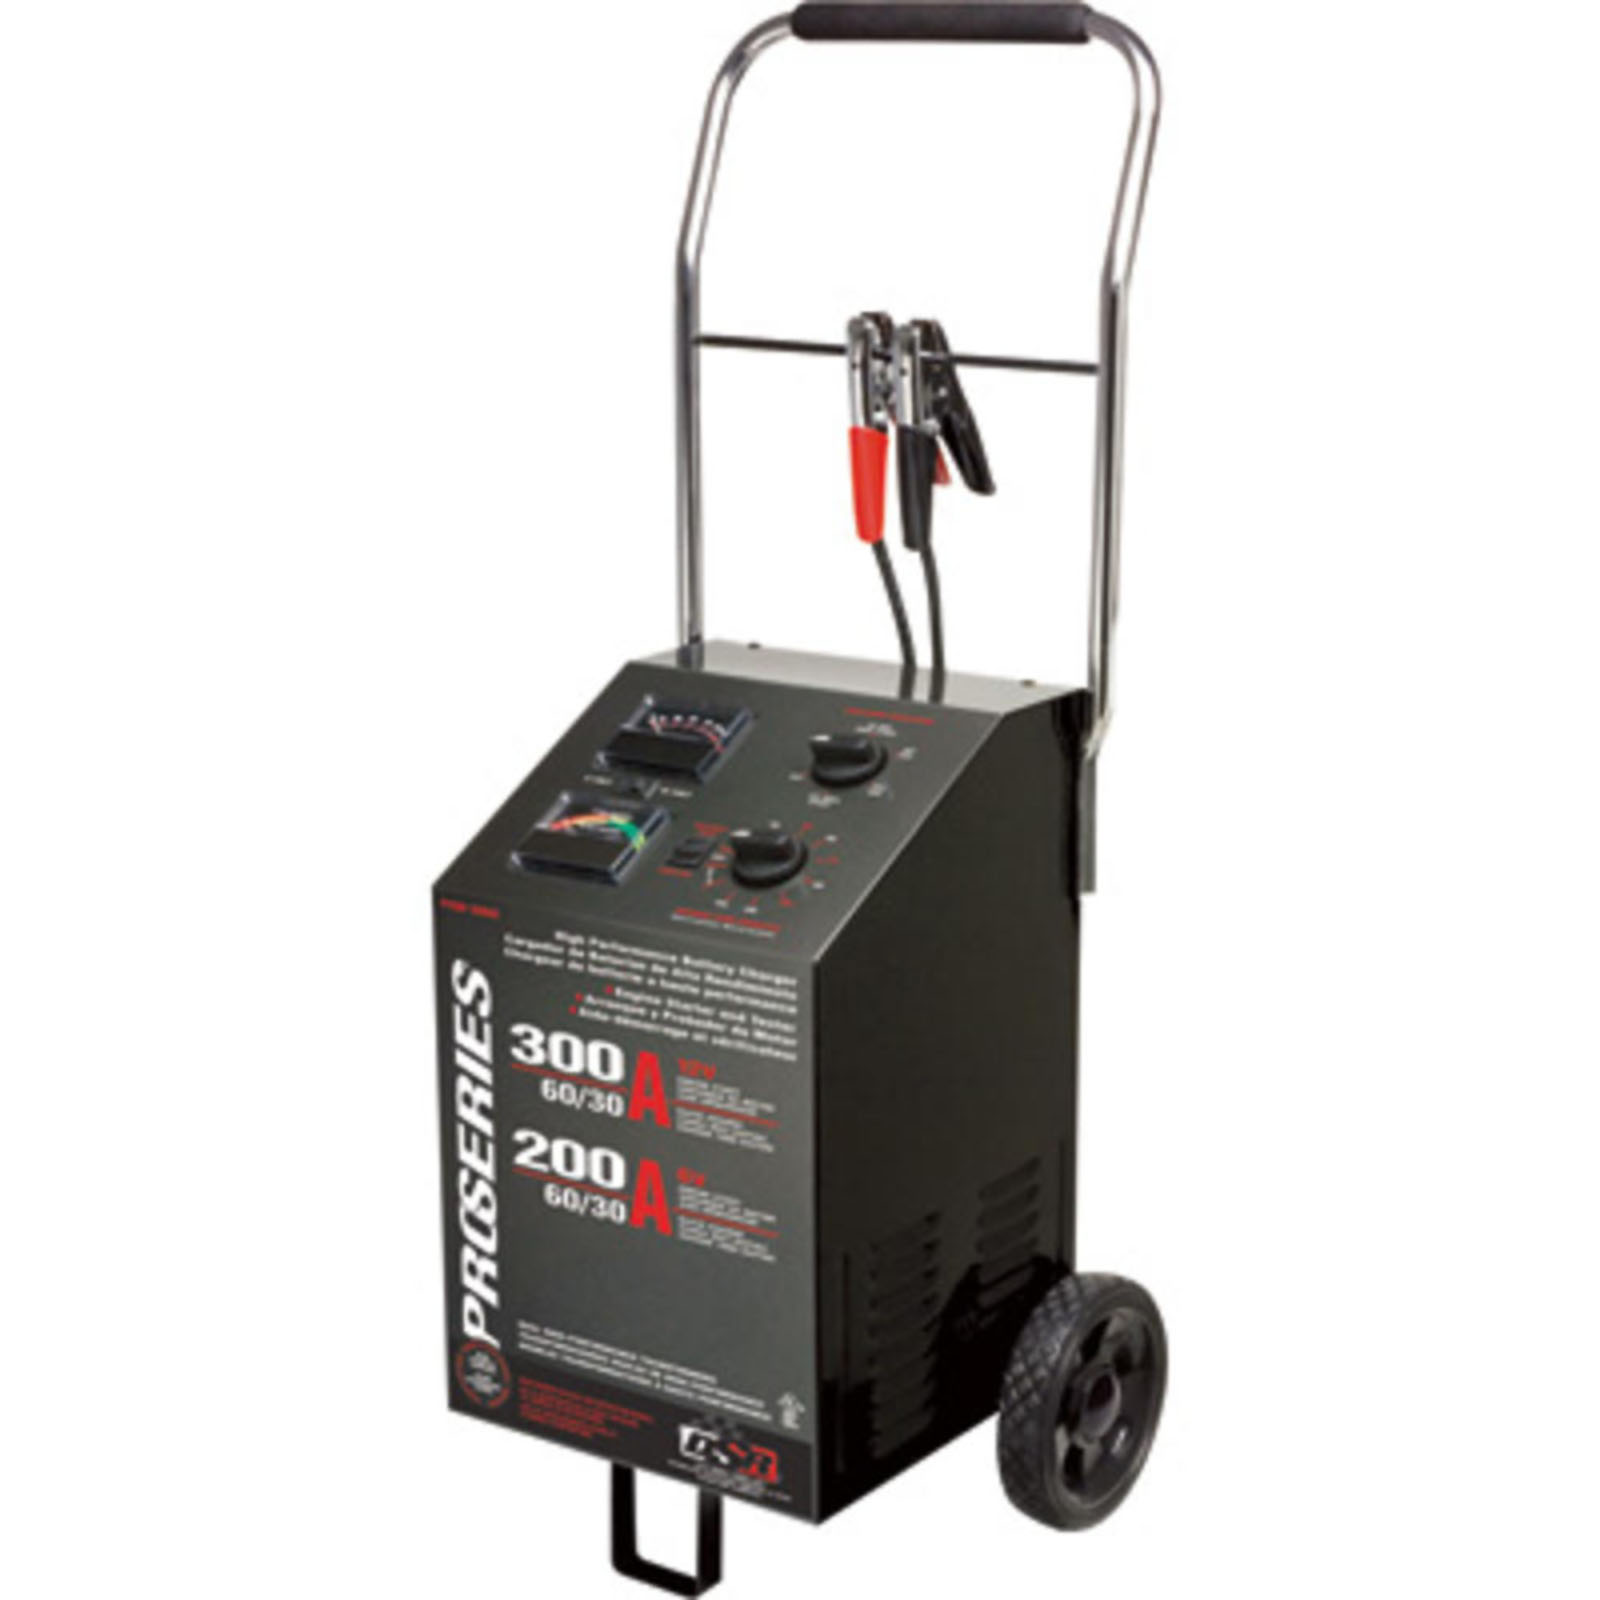 Schumacher Electric  PSW-3060 Wheeled Battery Charger, 60/30 Amp Charge, 300 Amp Boost, for 6 or 12 Volt, Manual Operation